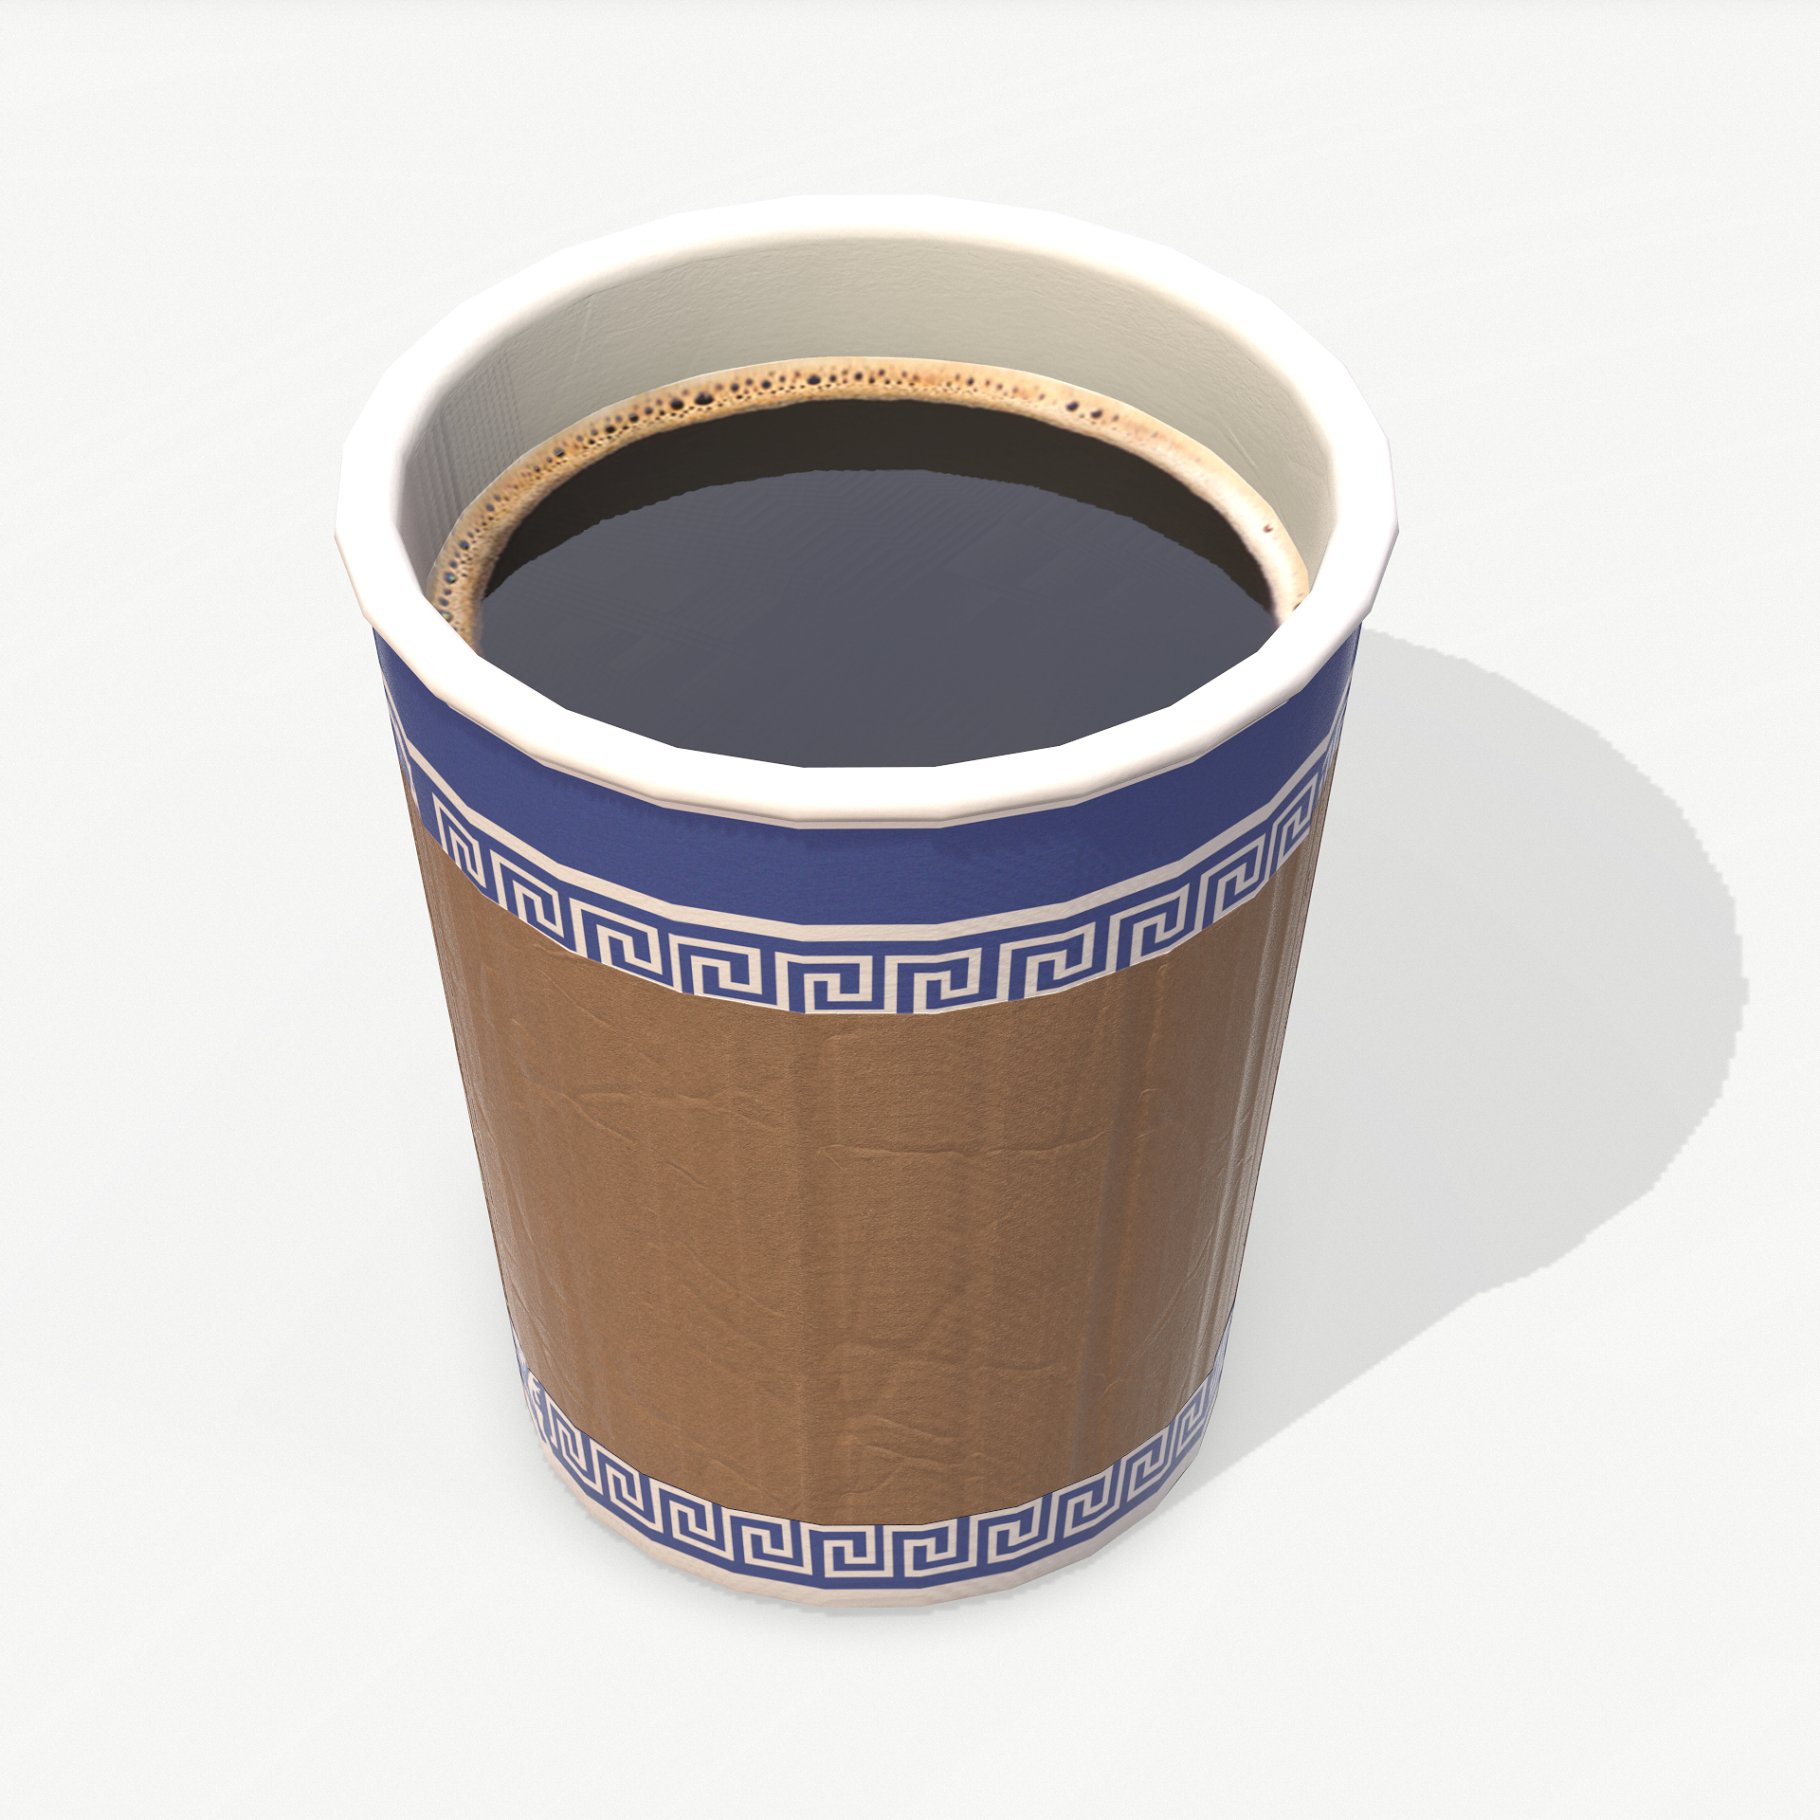 A disposable cup is shown.